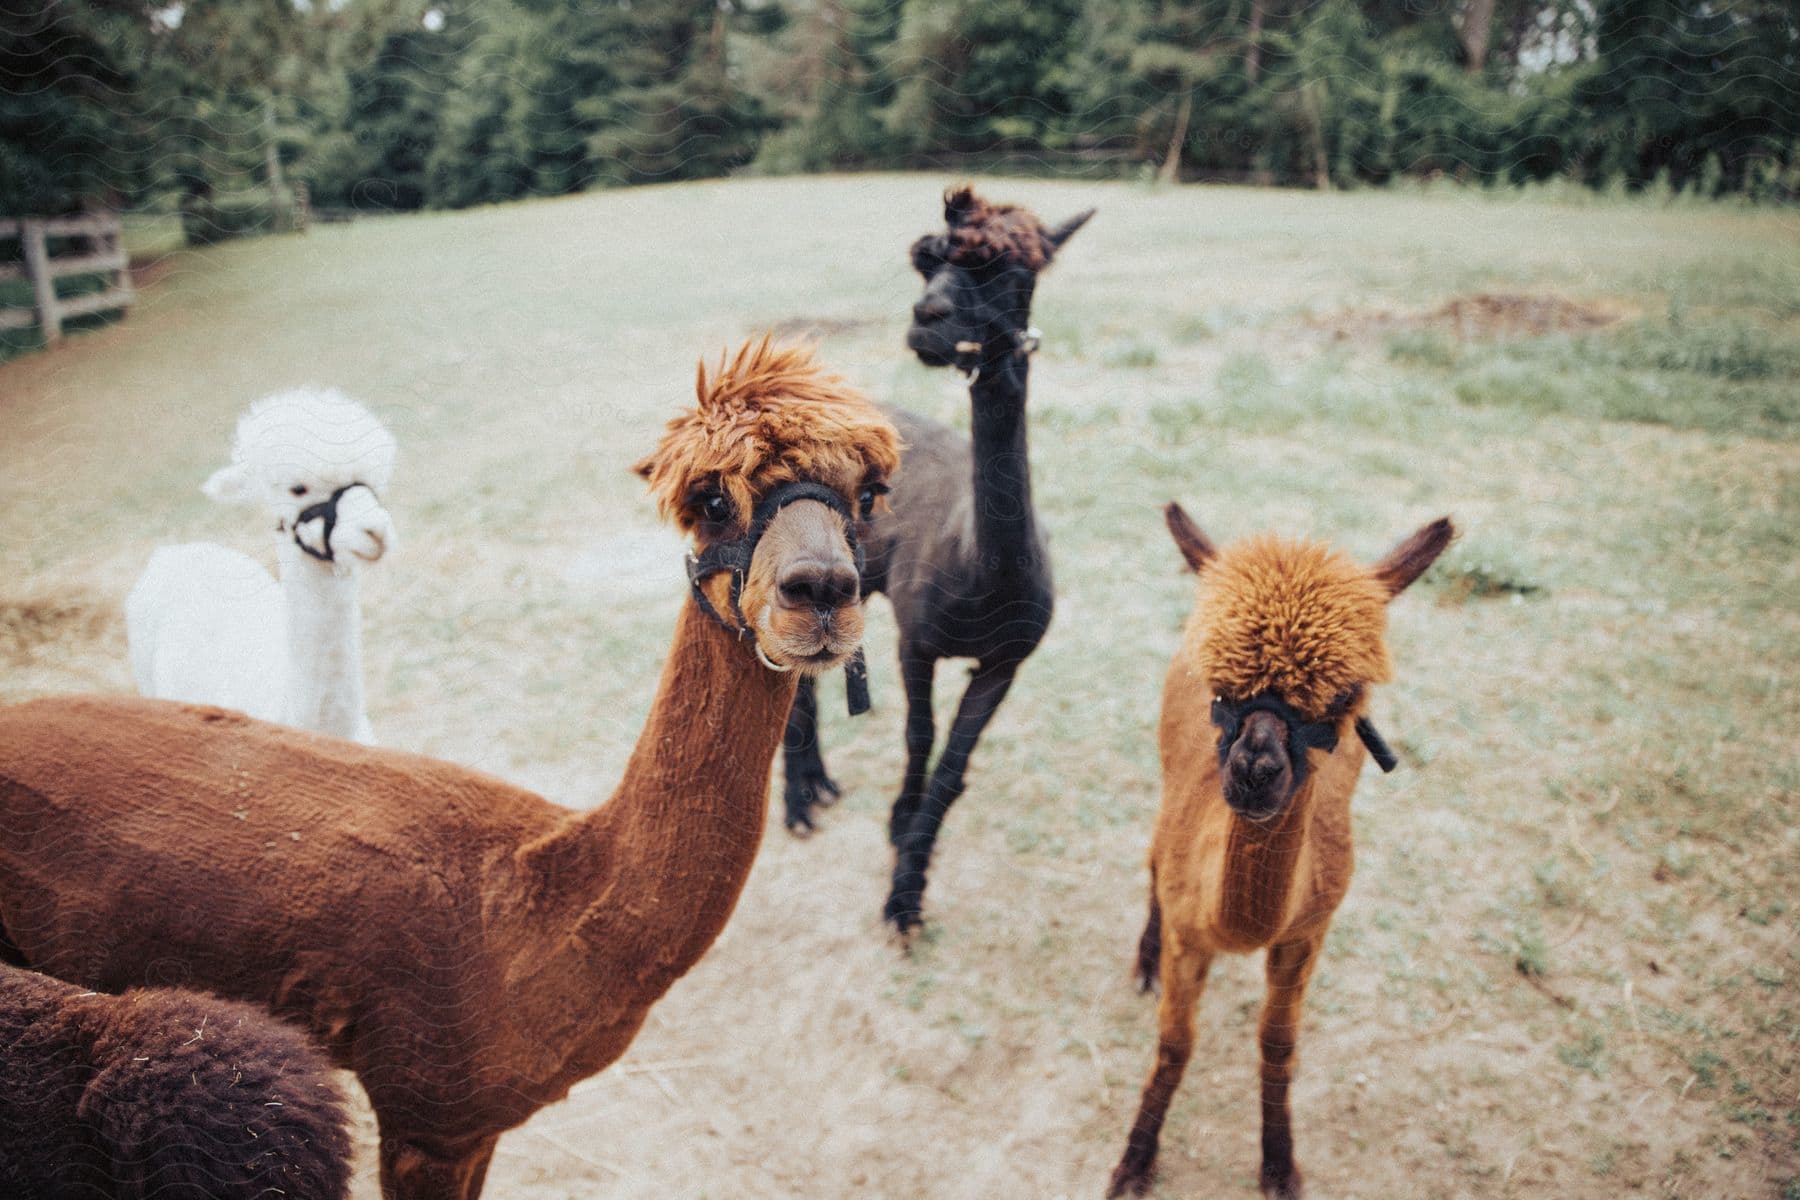 Four alpacas of different colors standing in a grassy field and looking straight ahead